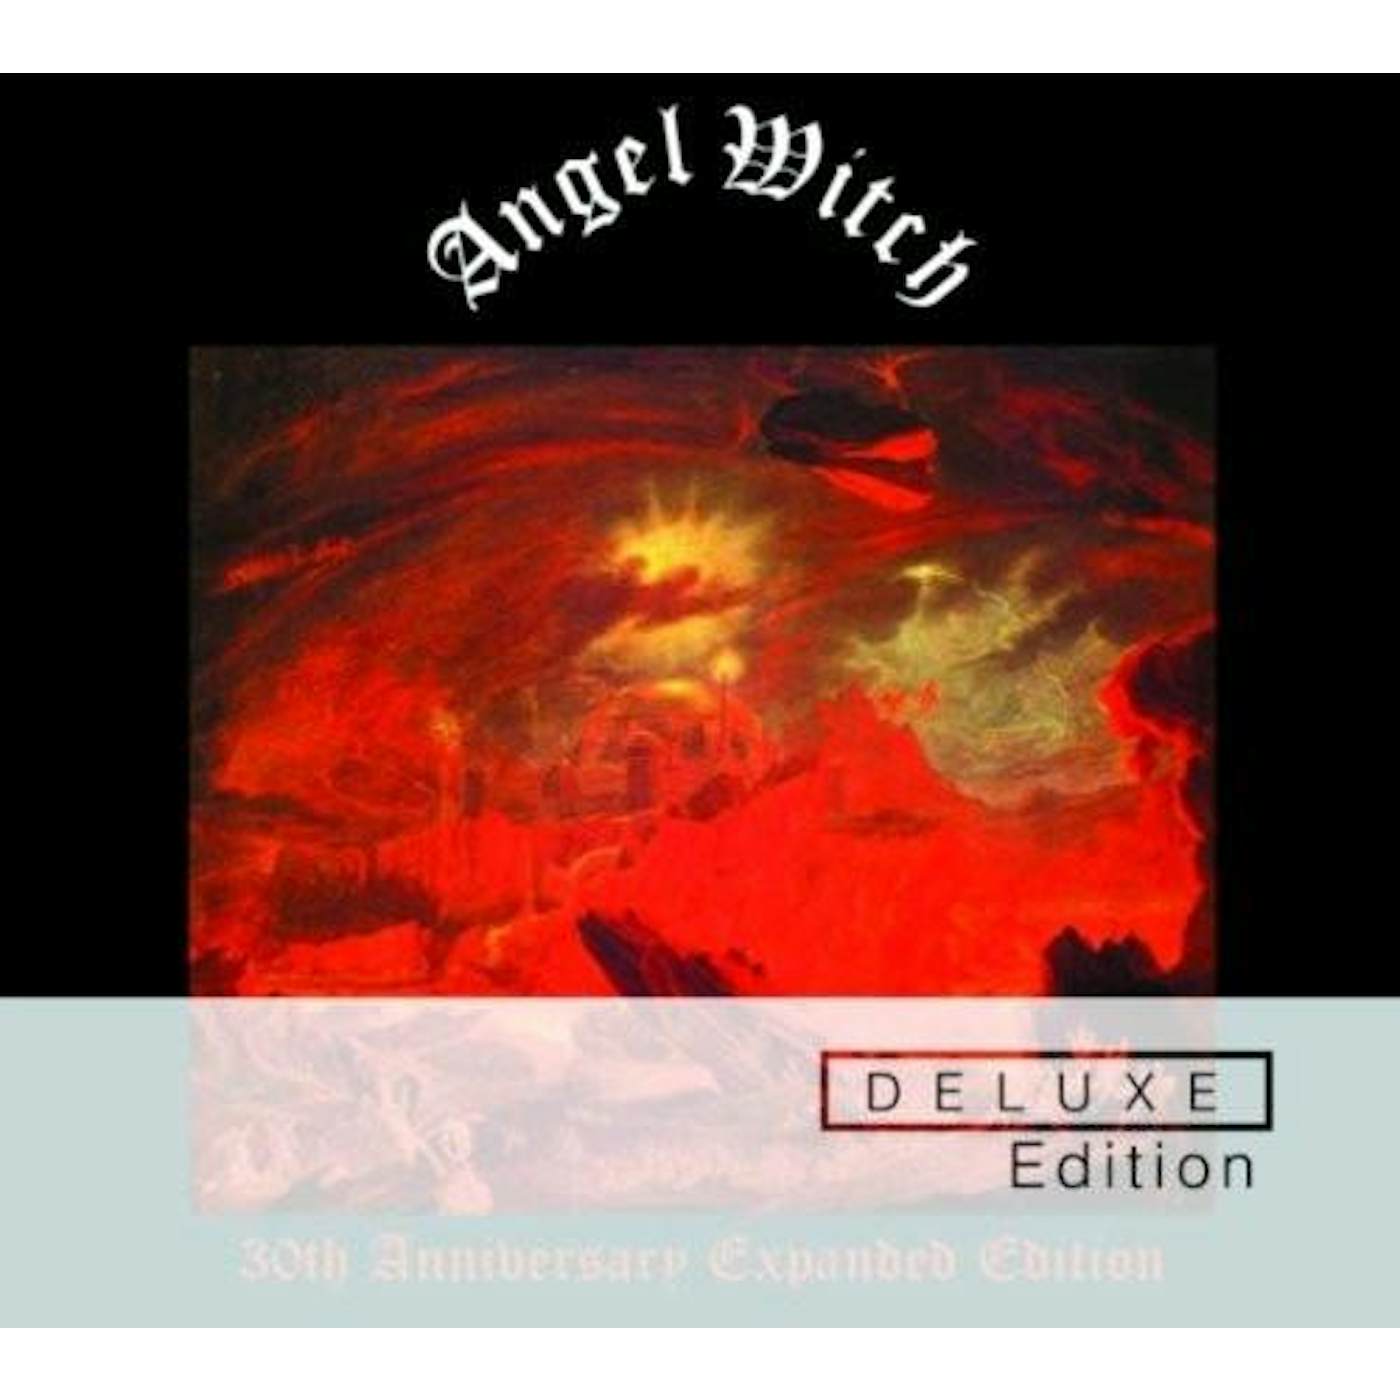 ANGEL WITCH (30TH ANNIVERSARY) CD